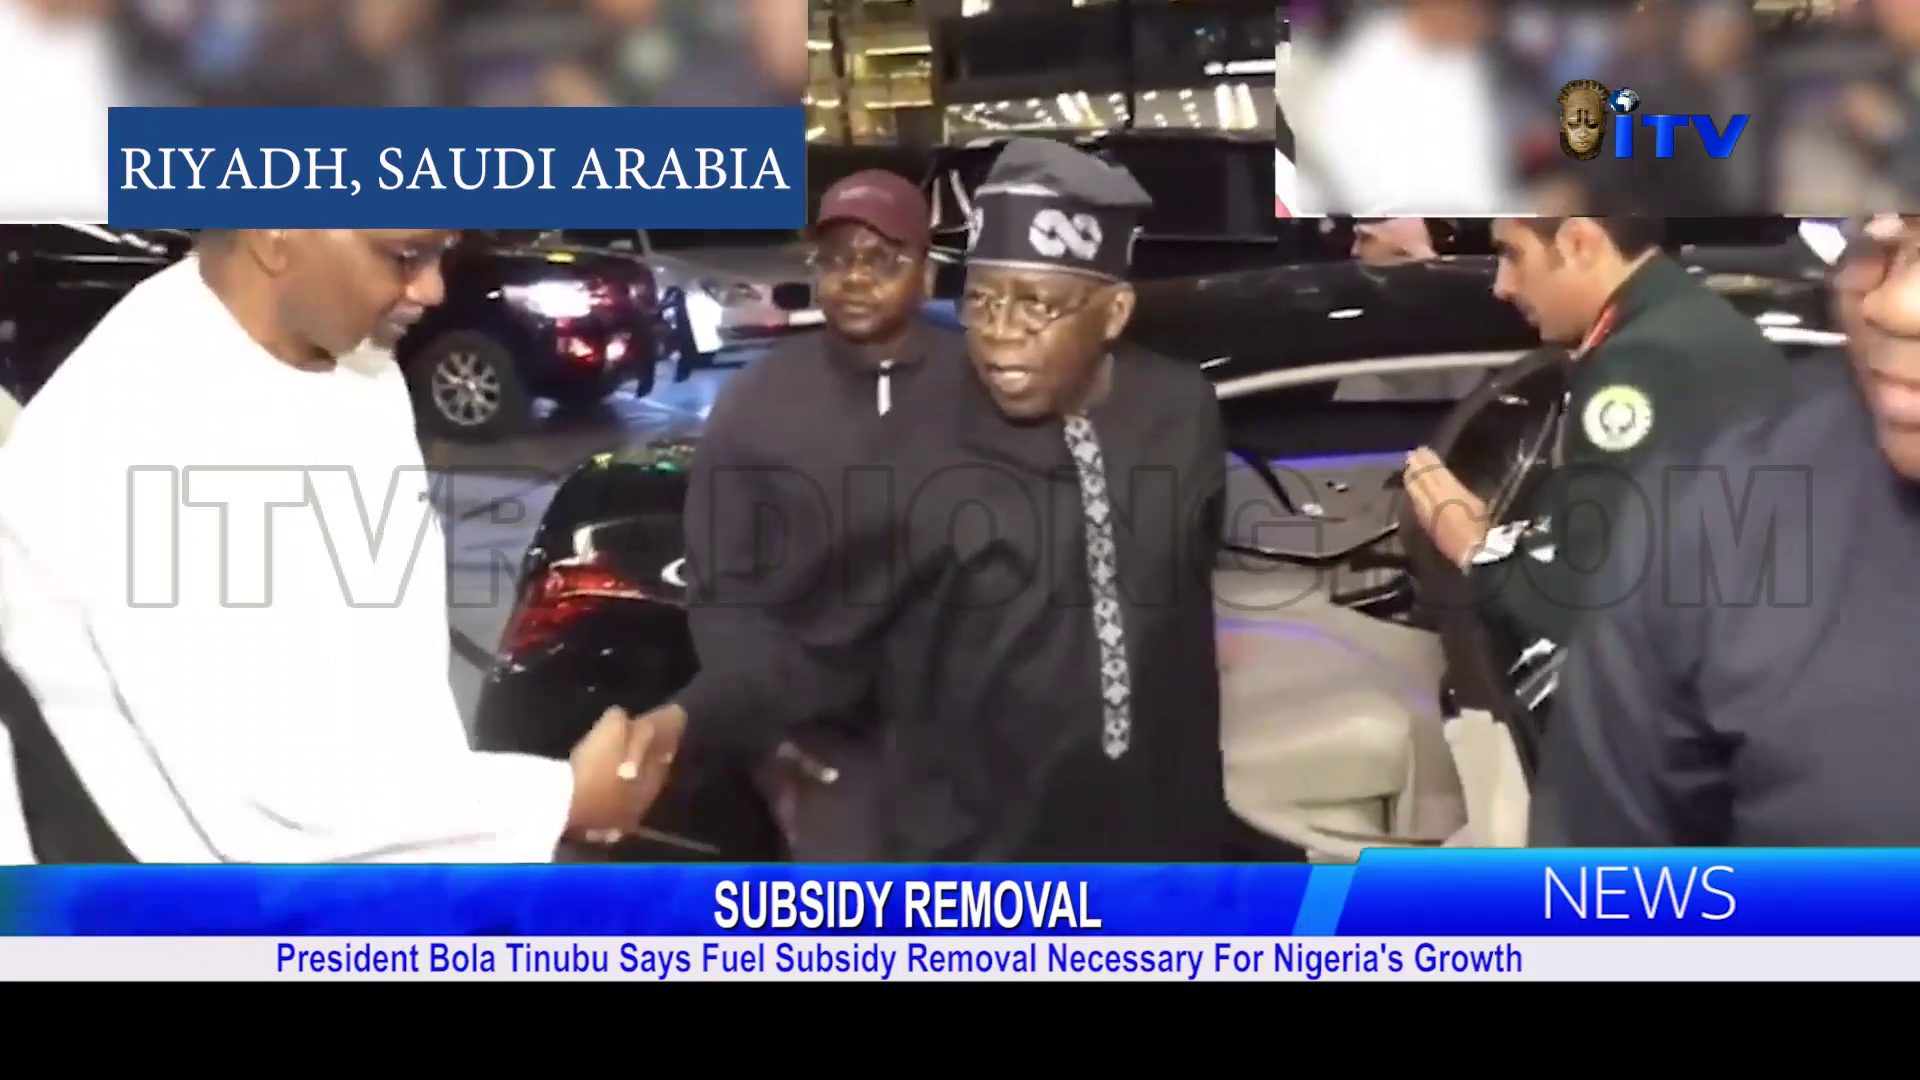 President Bola Tinubu Says Fuel Subsidy Removal Necessary For Nigeria’s Growth